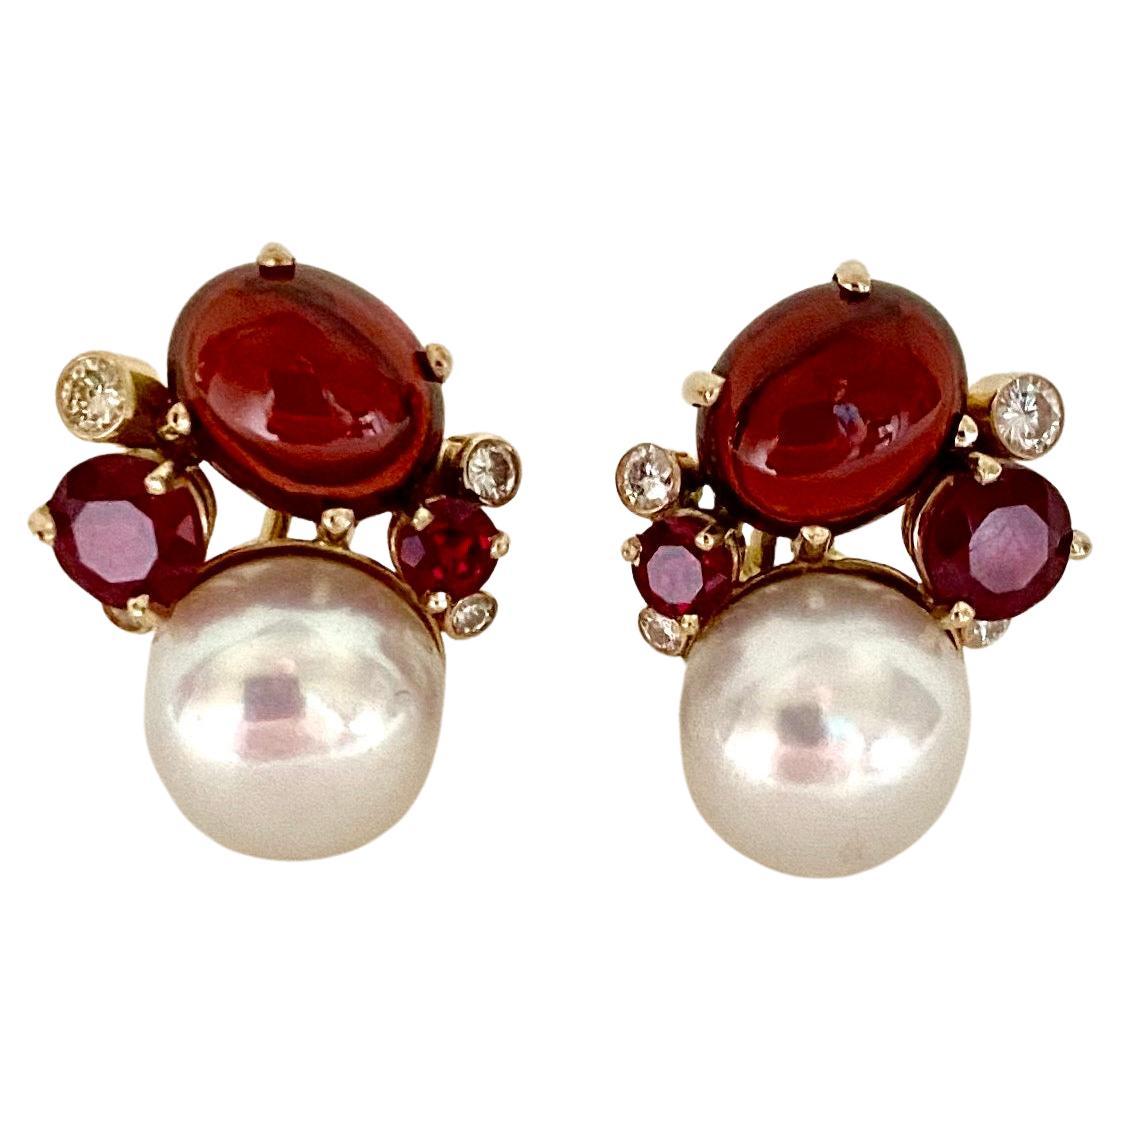 Red gems are clustered together along with white pearls to create these Confetti earrings.  Mixed together are cabochon garnets (origin: Mozambique) with faceted rubies (origin: Thailand), white diamonds and 12mm freshwater pearls.  The gems are all